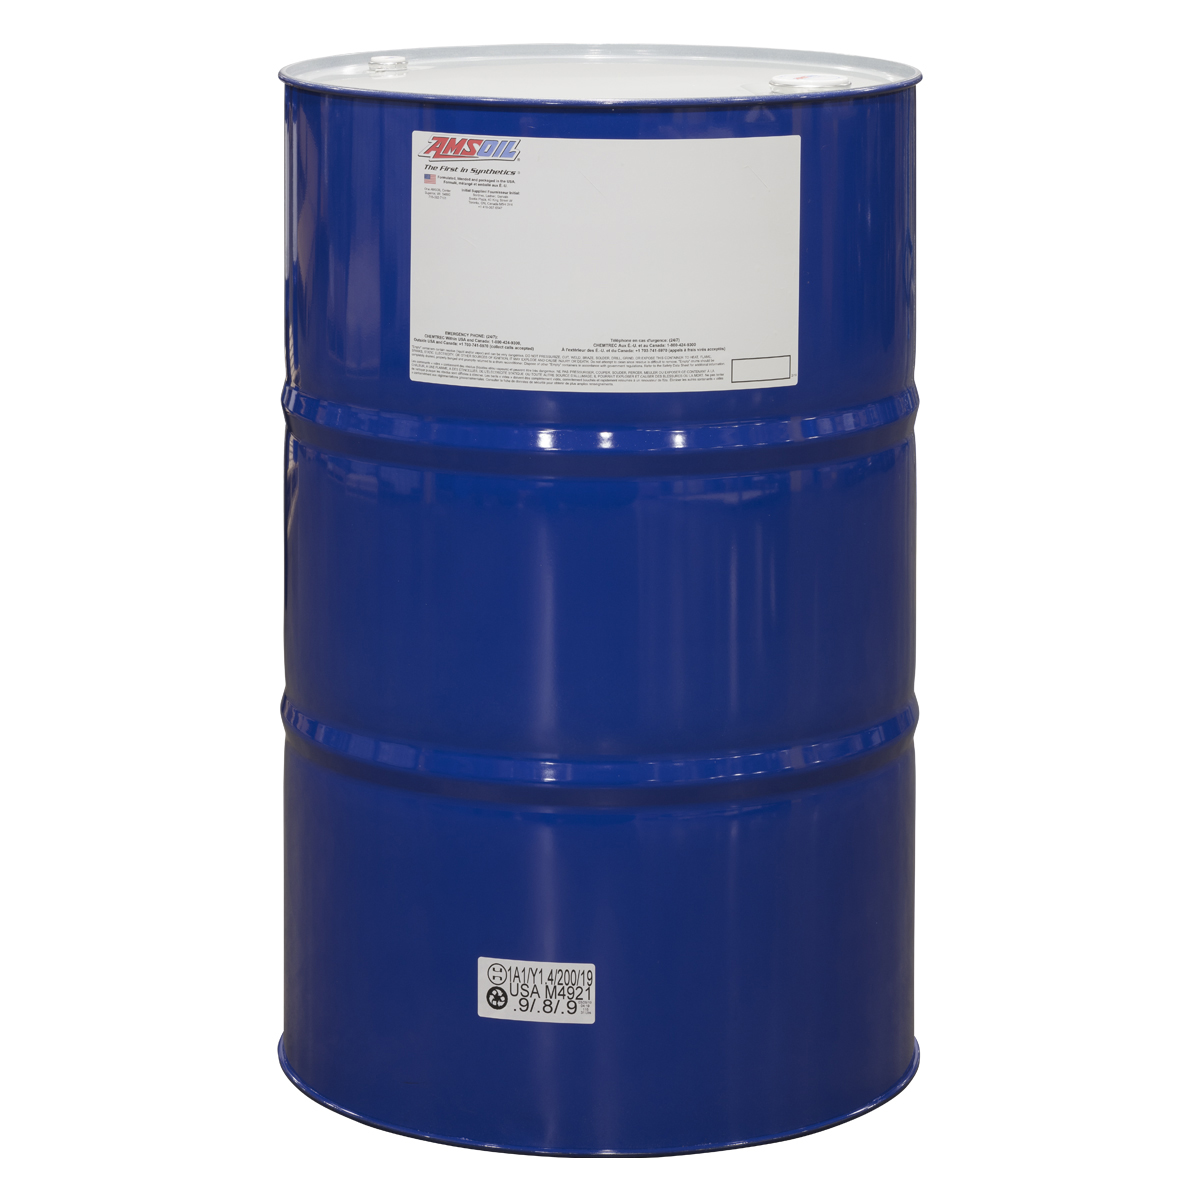 5W-30 synthetic motor oil 55 gallon drum